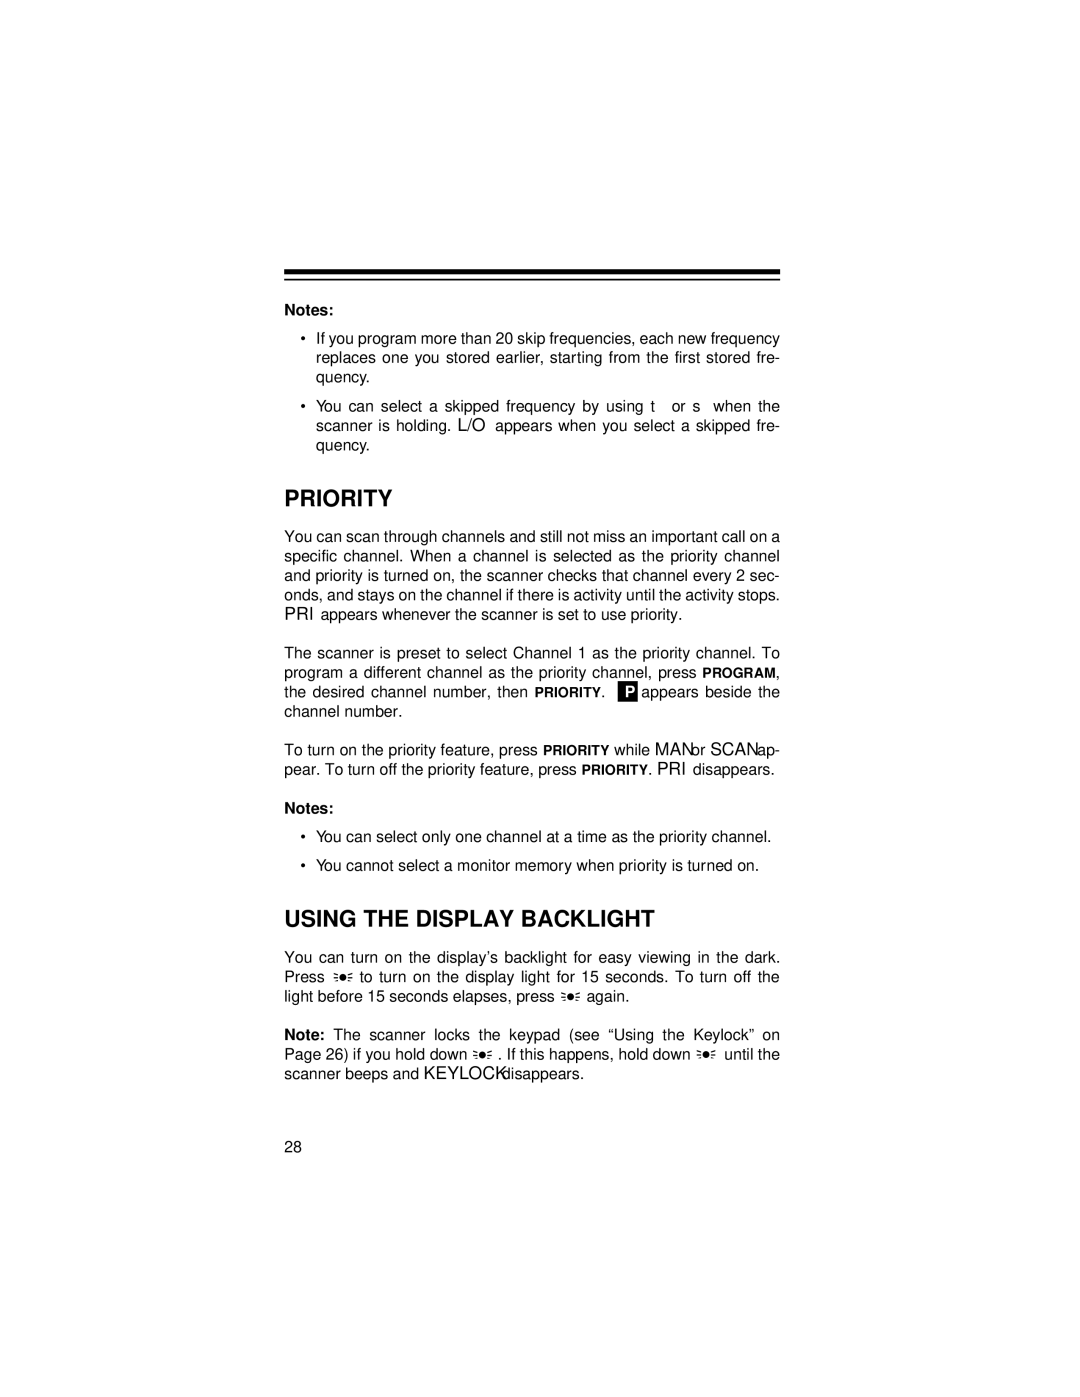 Radio Shack Pro-71 owner manual Priority, Using the Display Backlight 